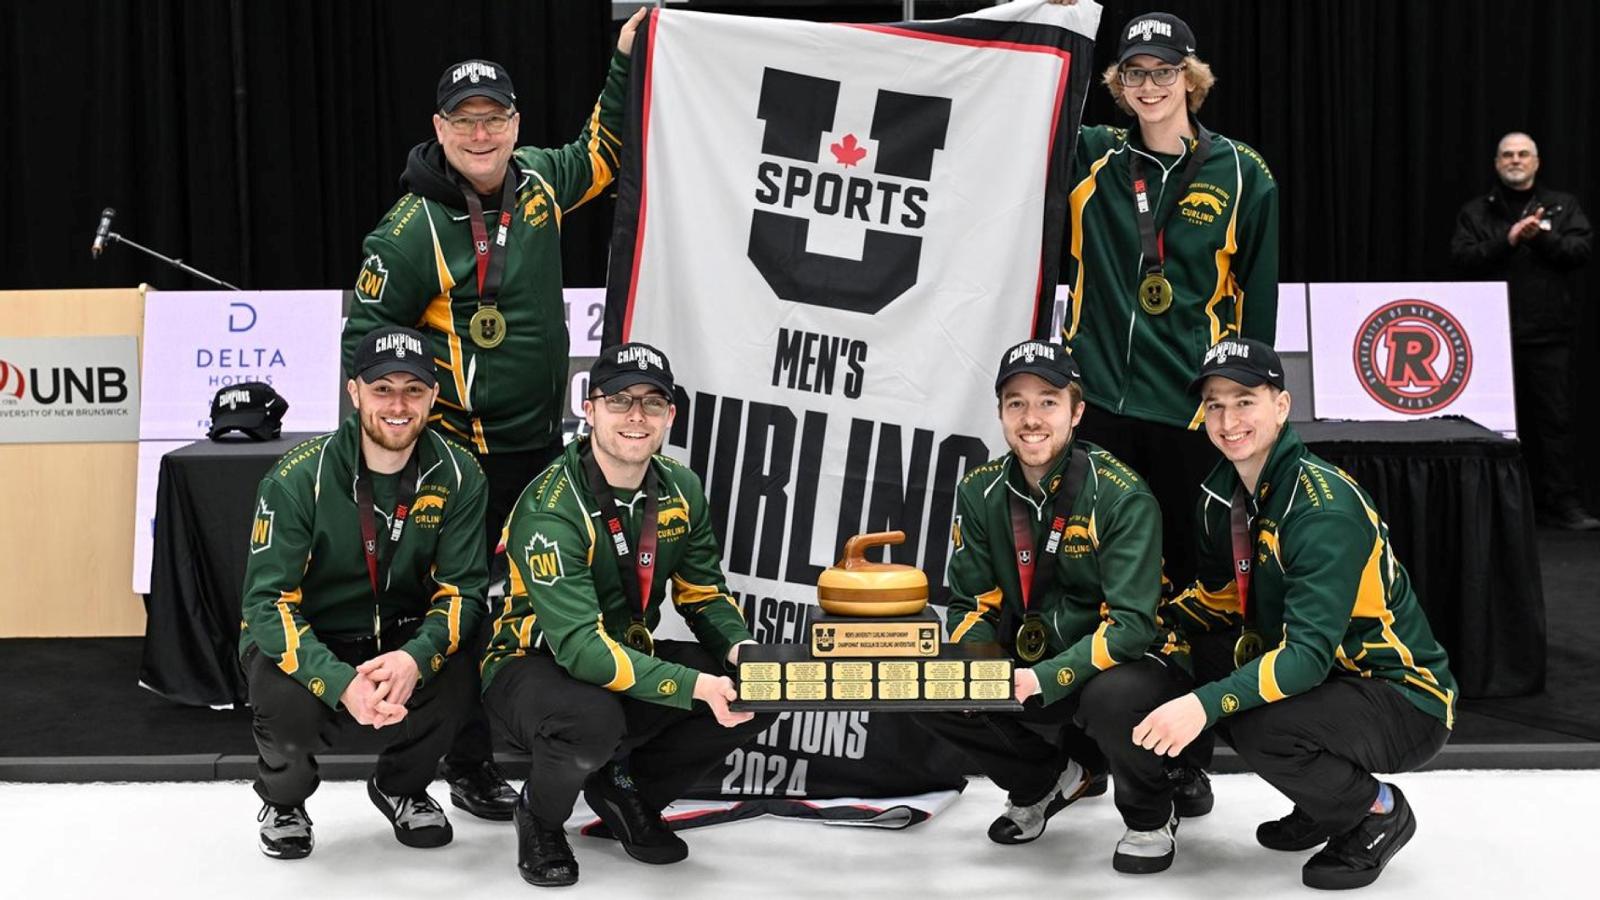 Six men in U of R curling team uniforms hold U SPORTS banner and trophy